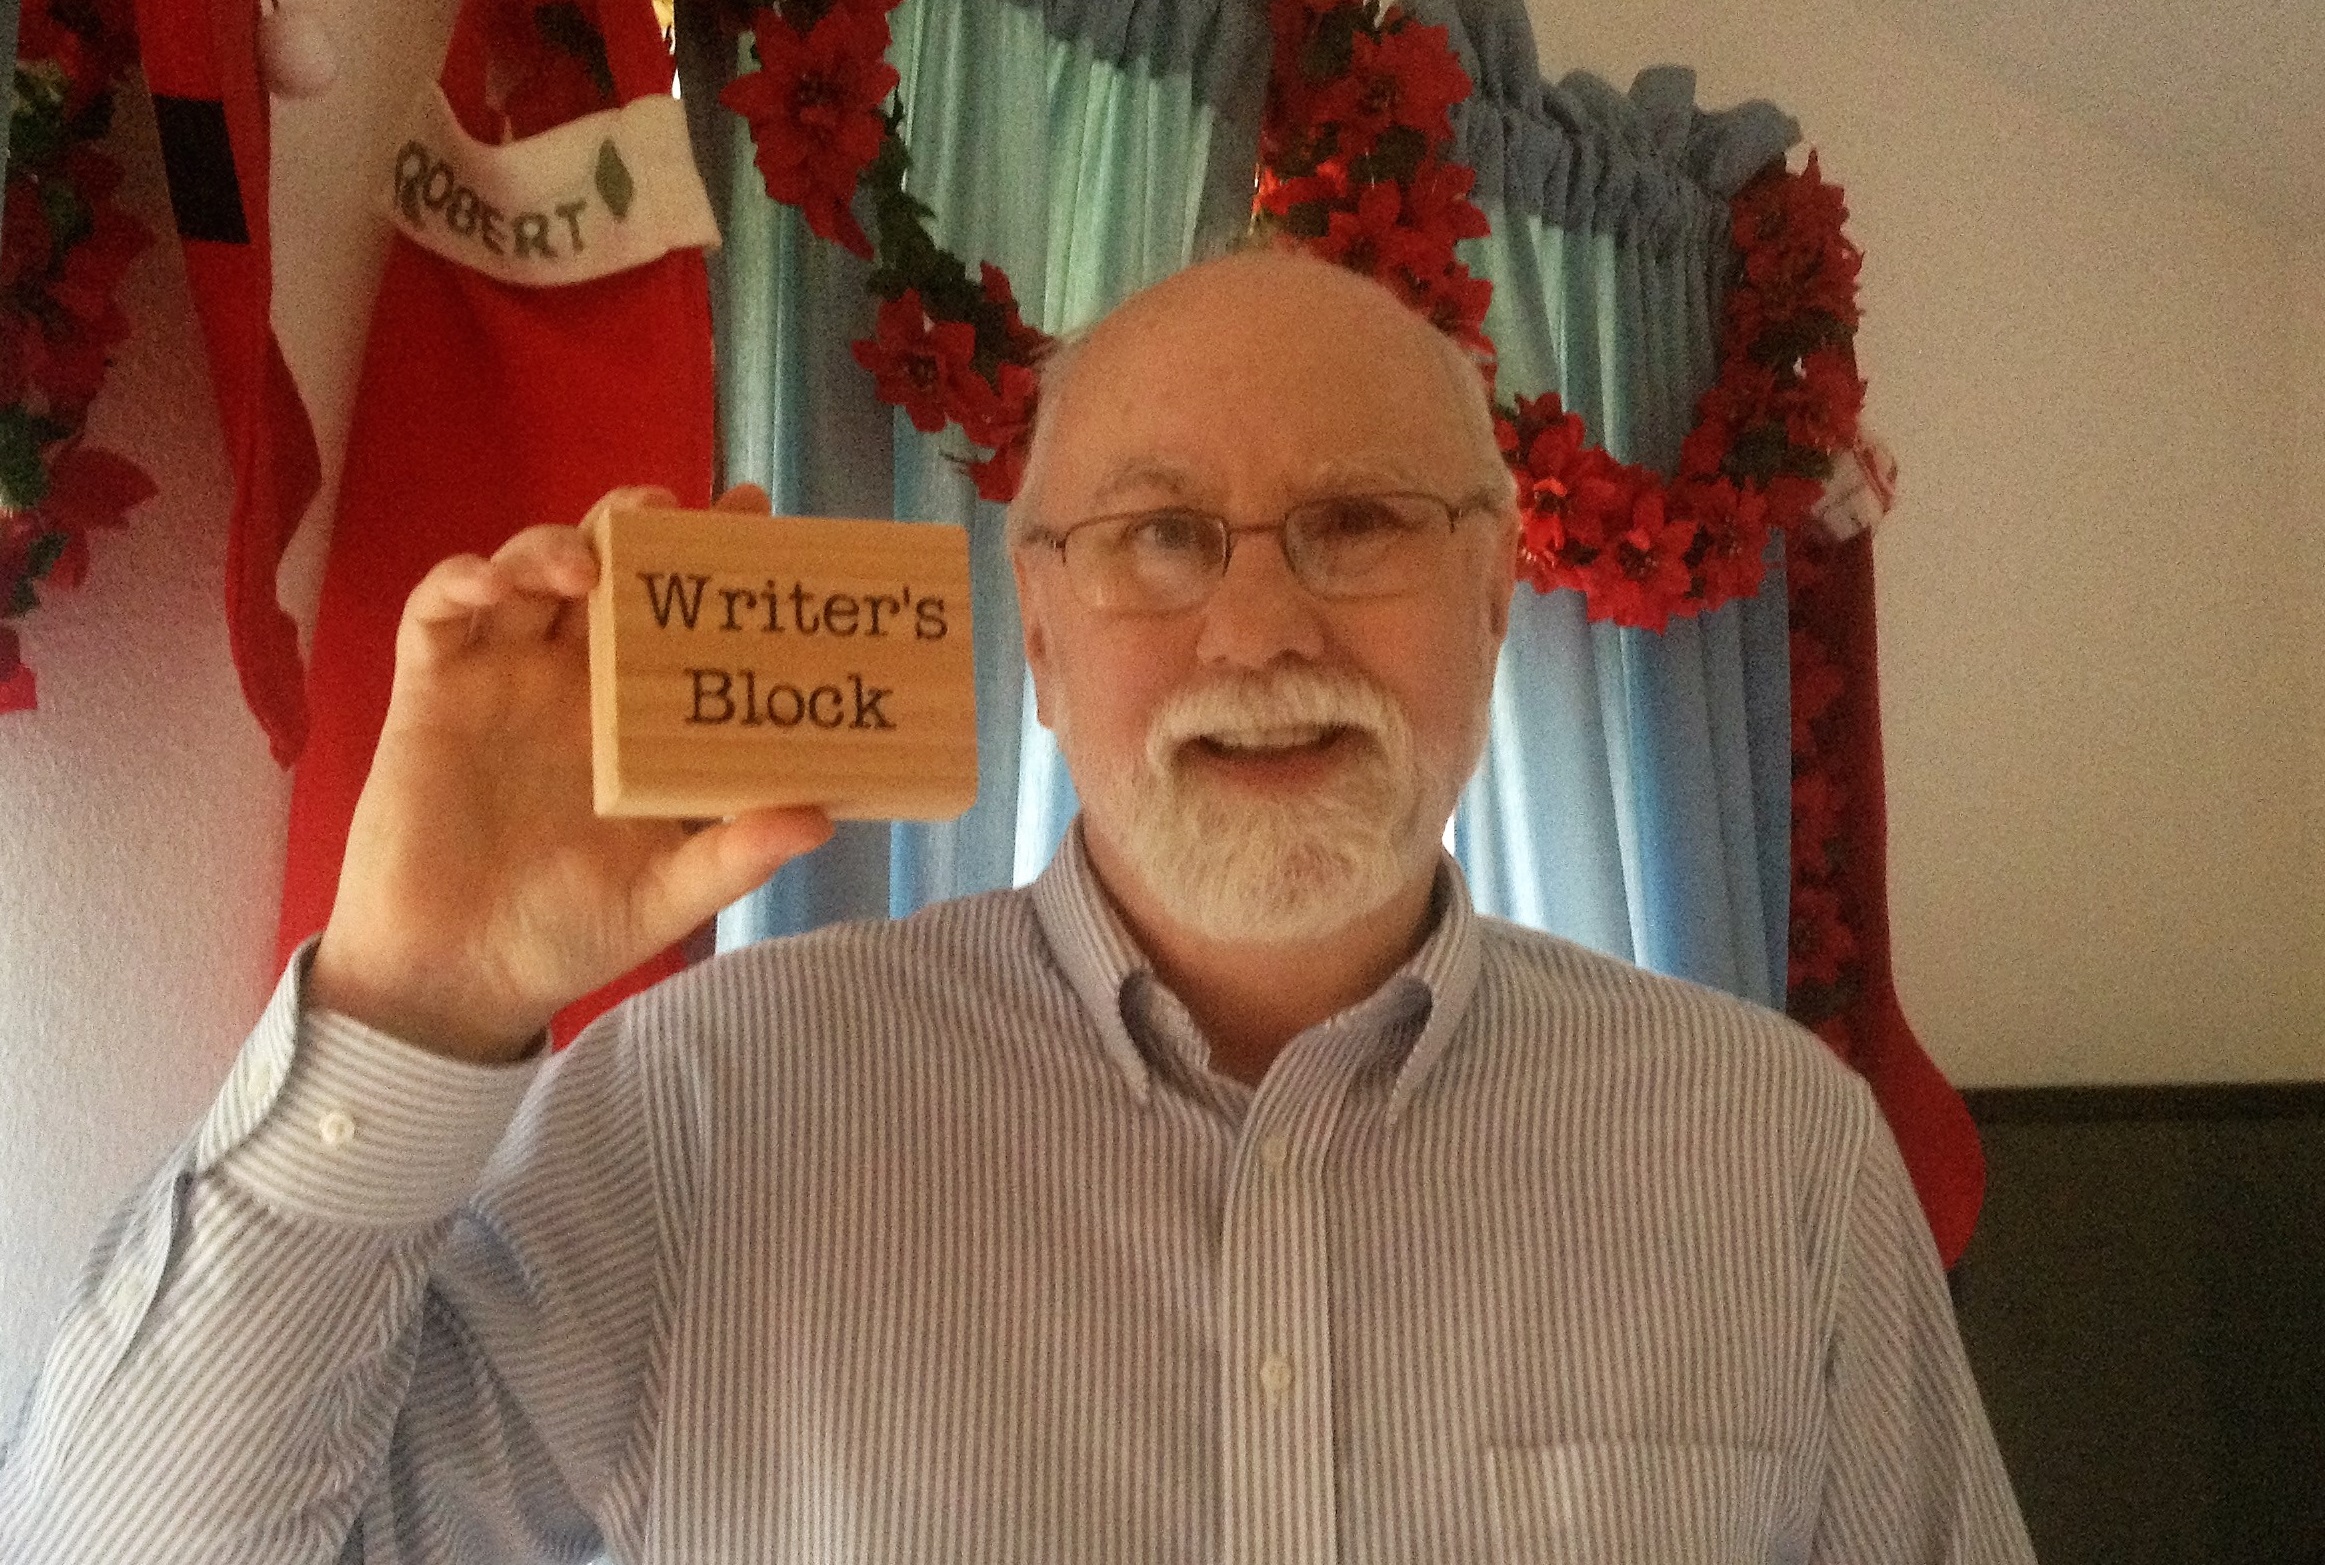  Kyle gets Writers Block as a Christmas present from his family 